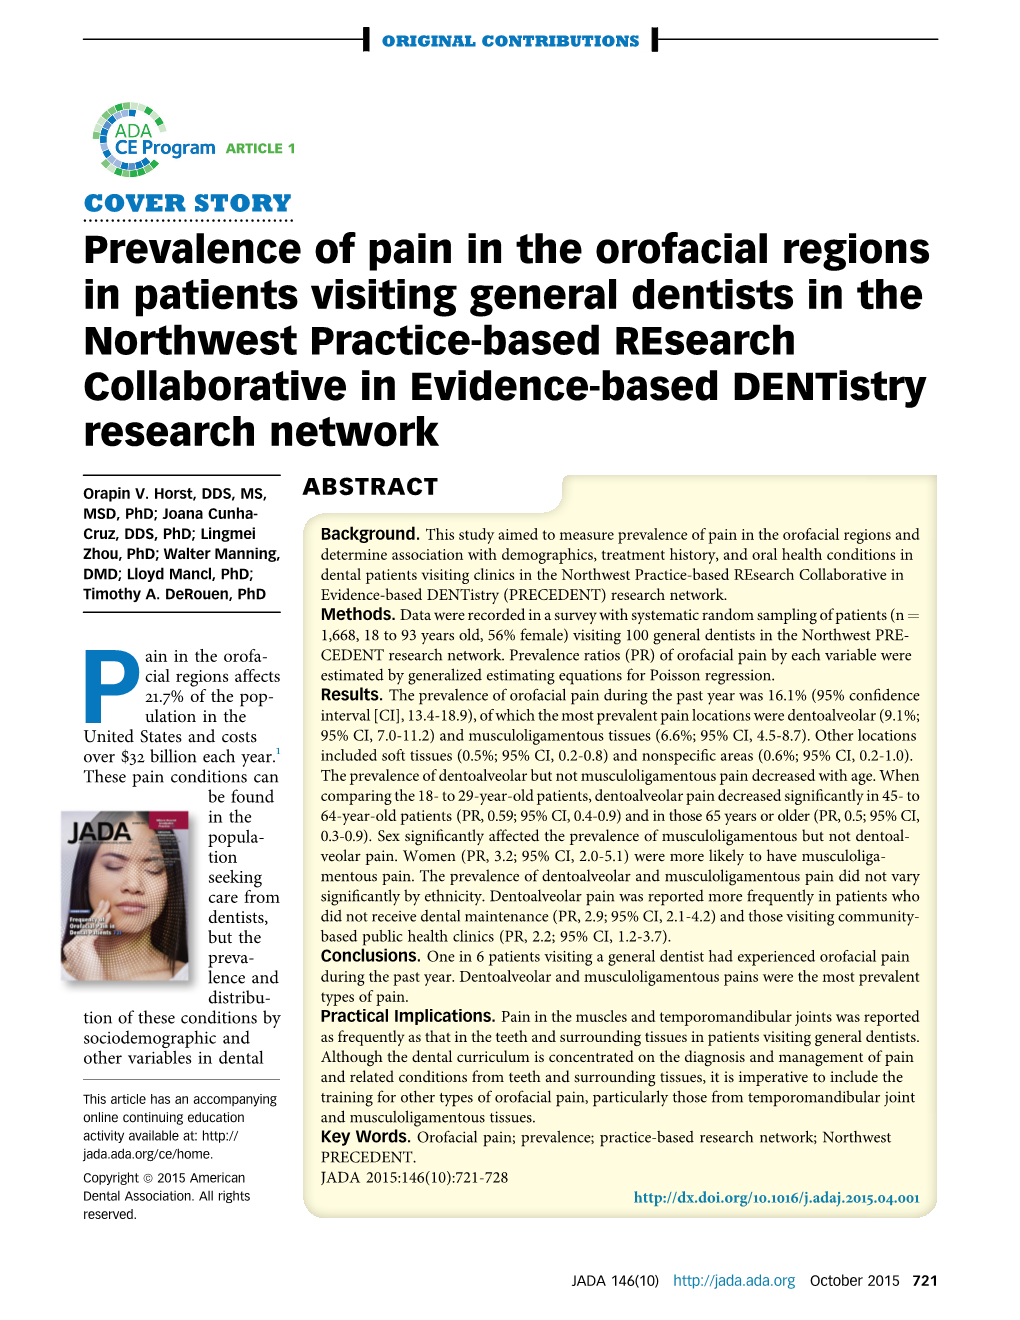 Prevalence of Pain in the Orofacial Regions